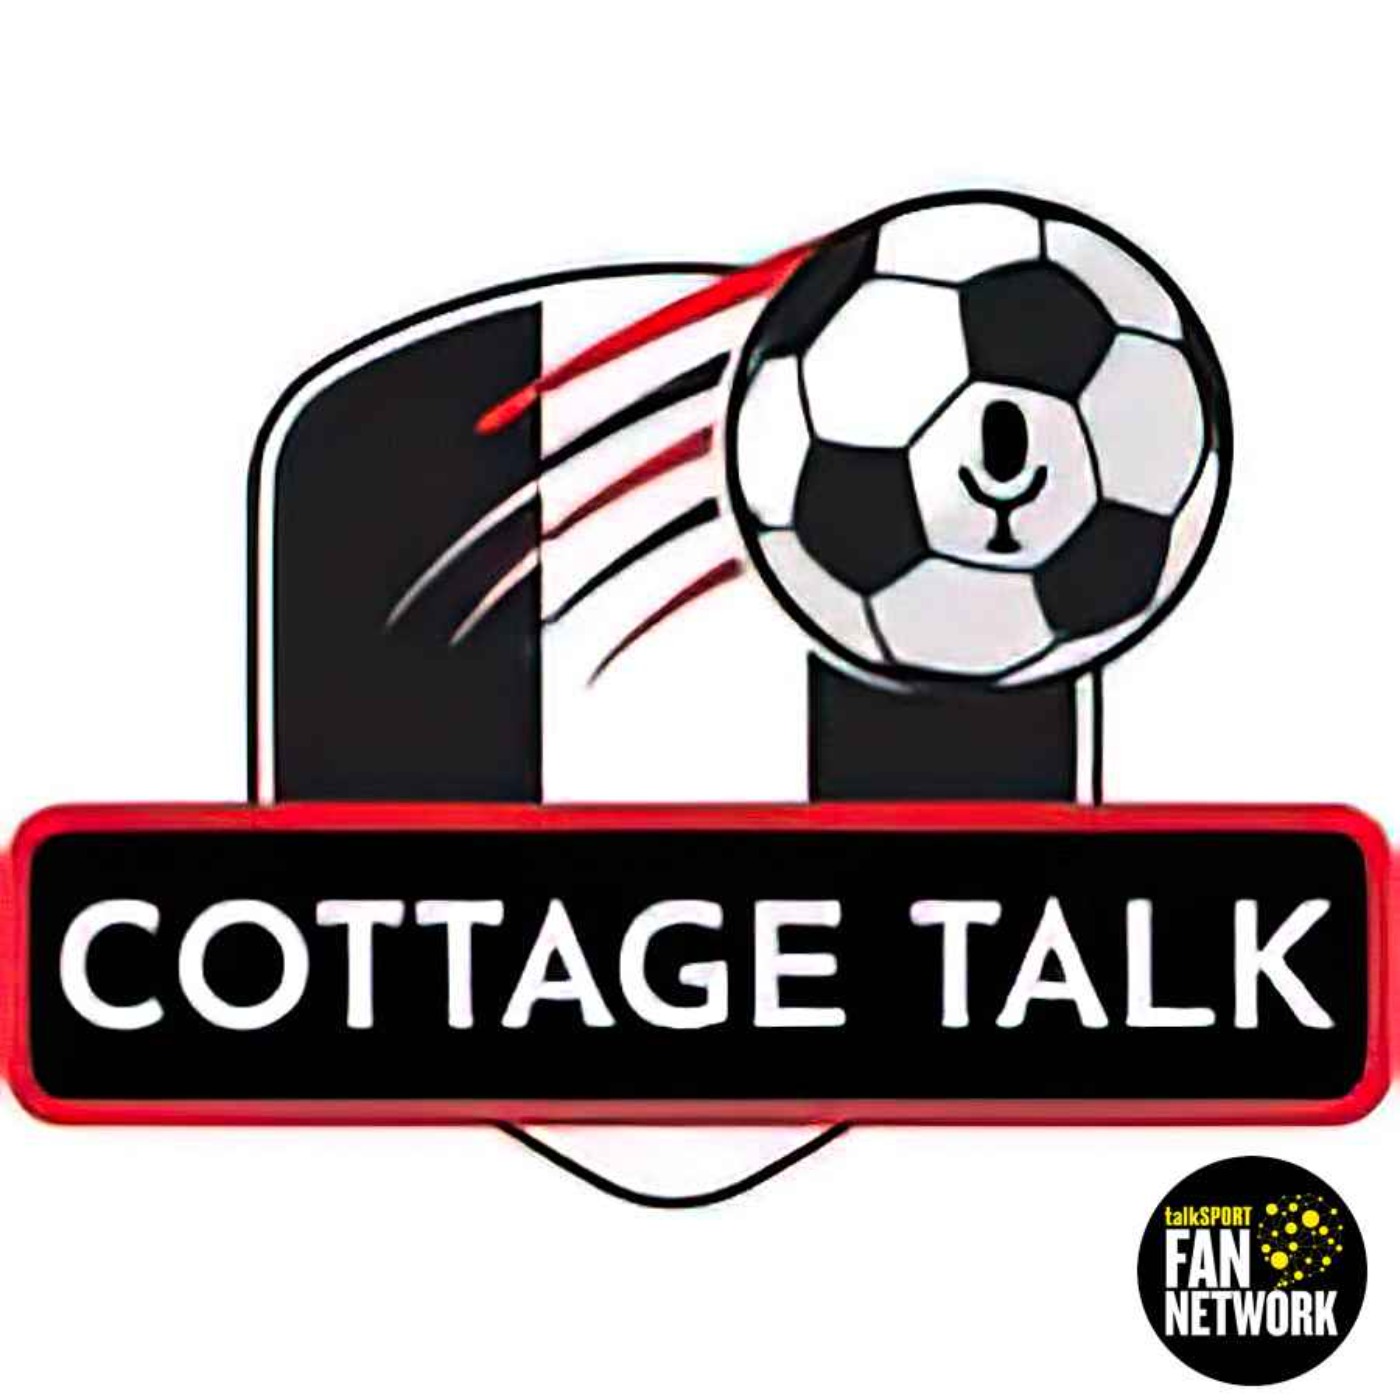 Cottage Talk Match Preview: My Five Keys To Victory Against Newcastle United